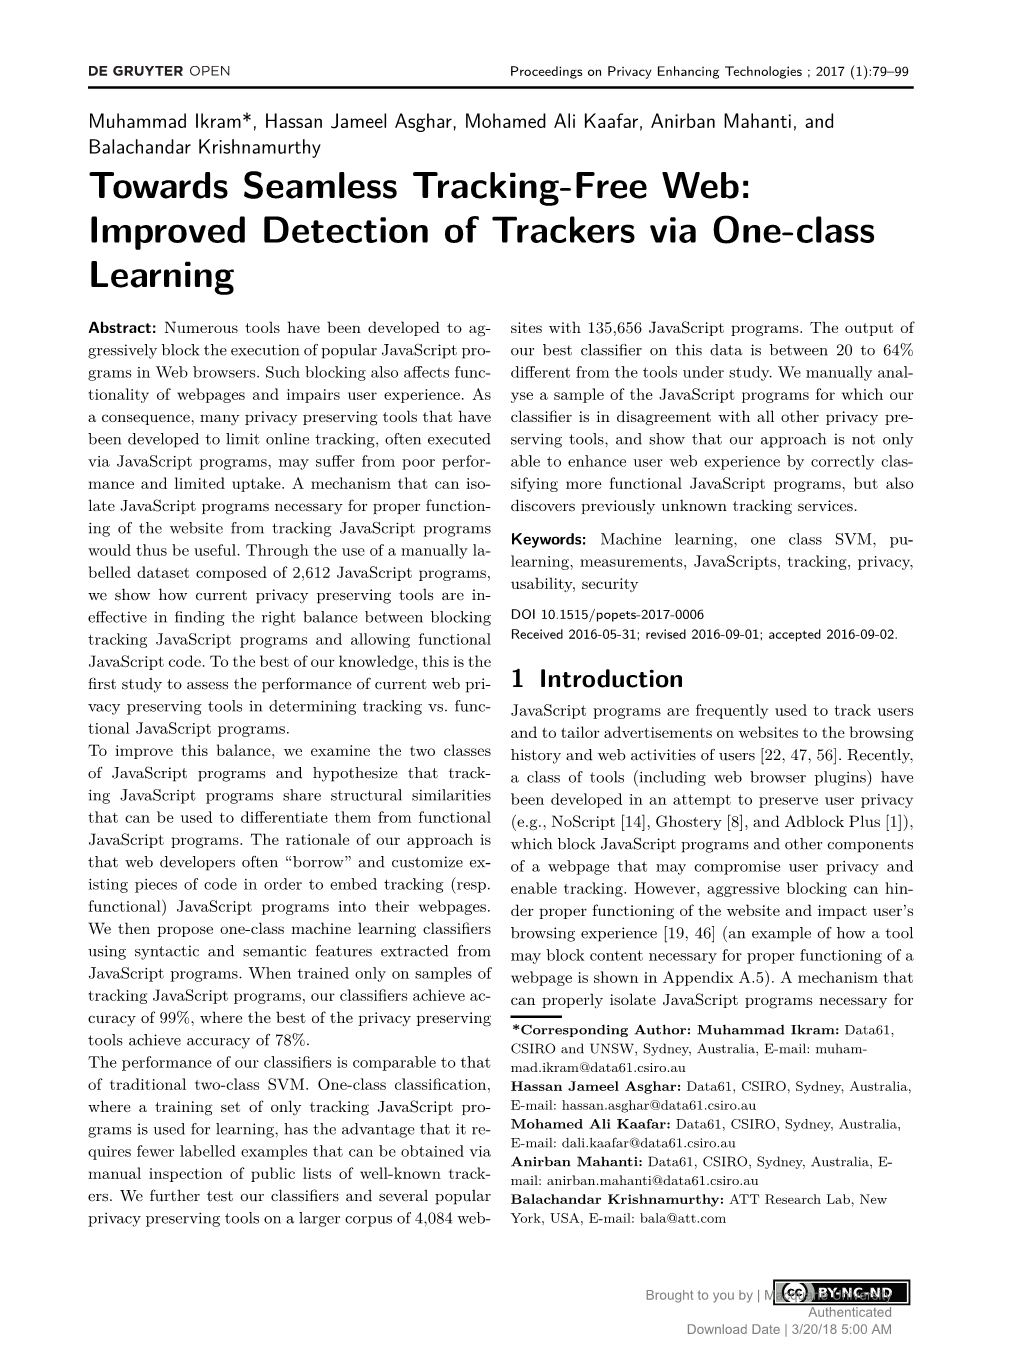 Towards Seamless Tracking-Free Web: Improved Detection of Trackers Via One-Class Learning